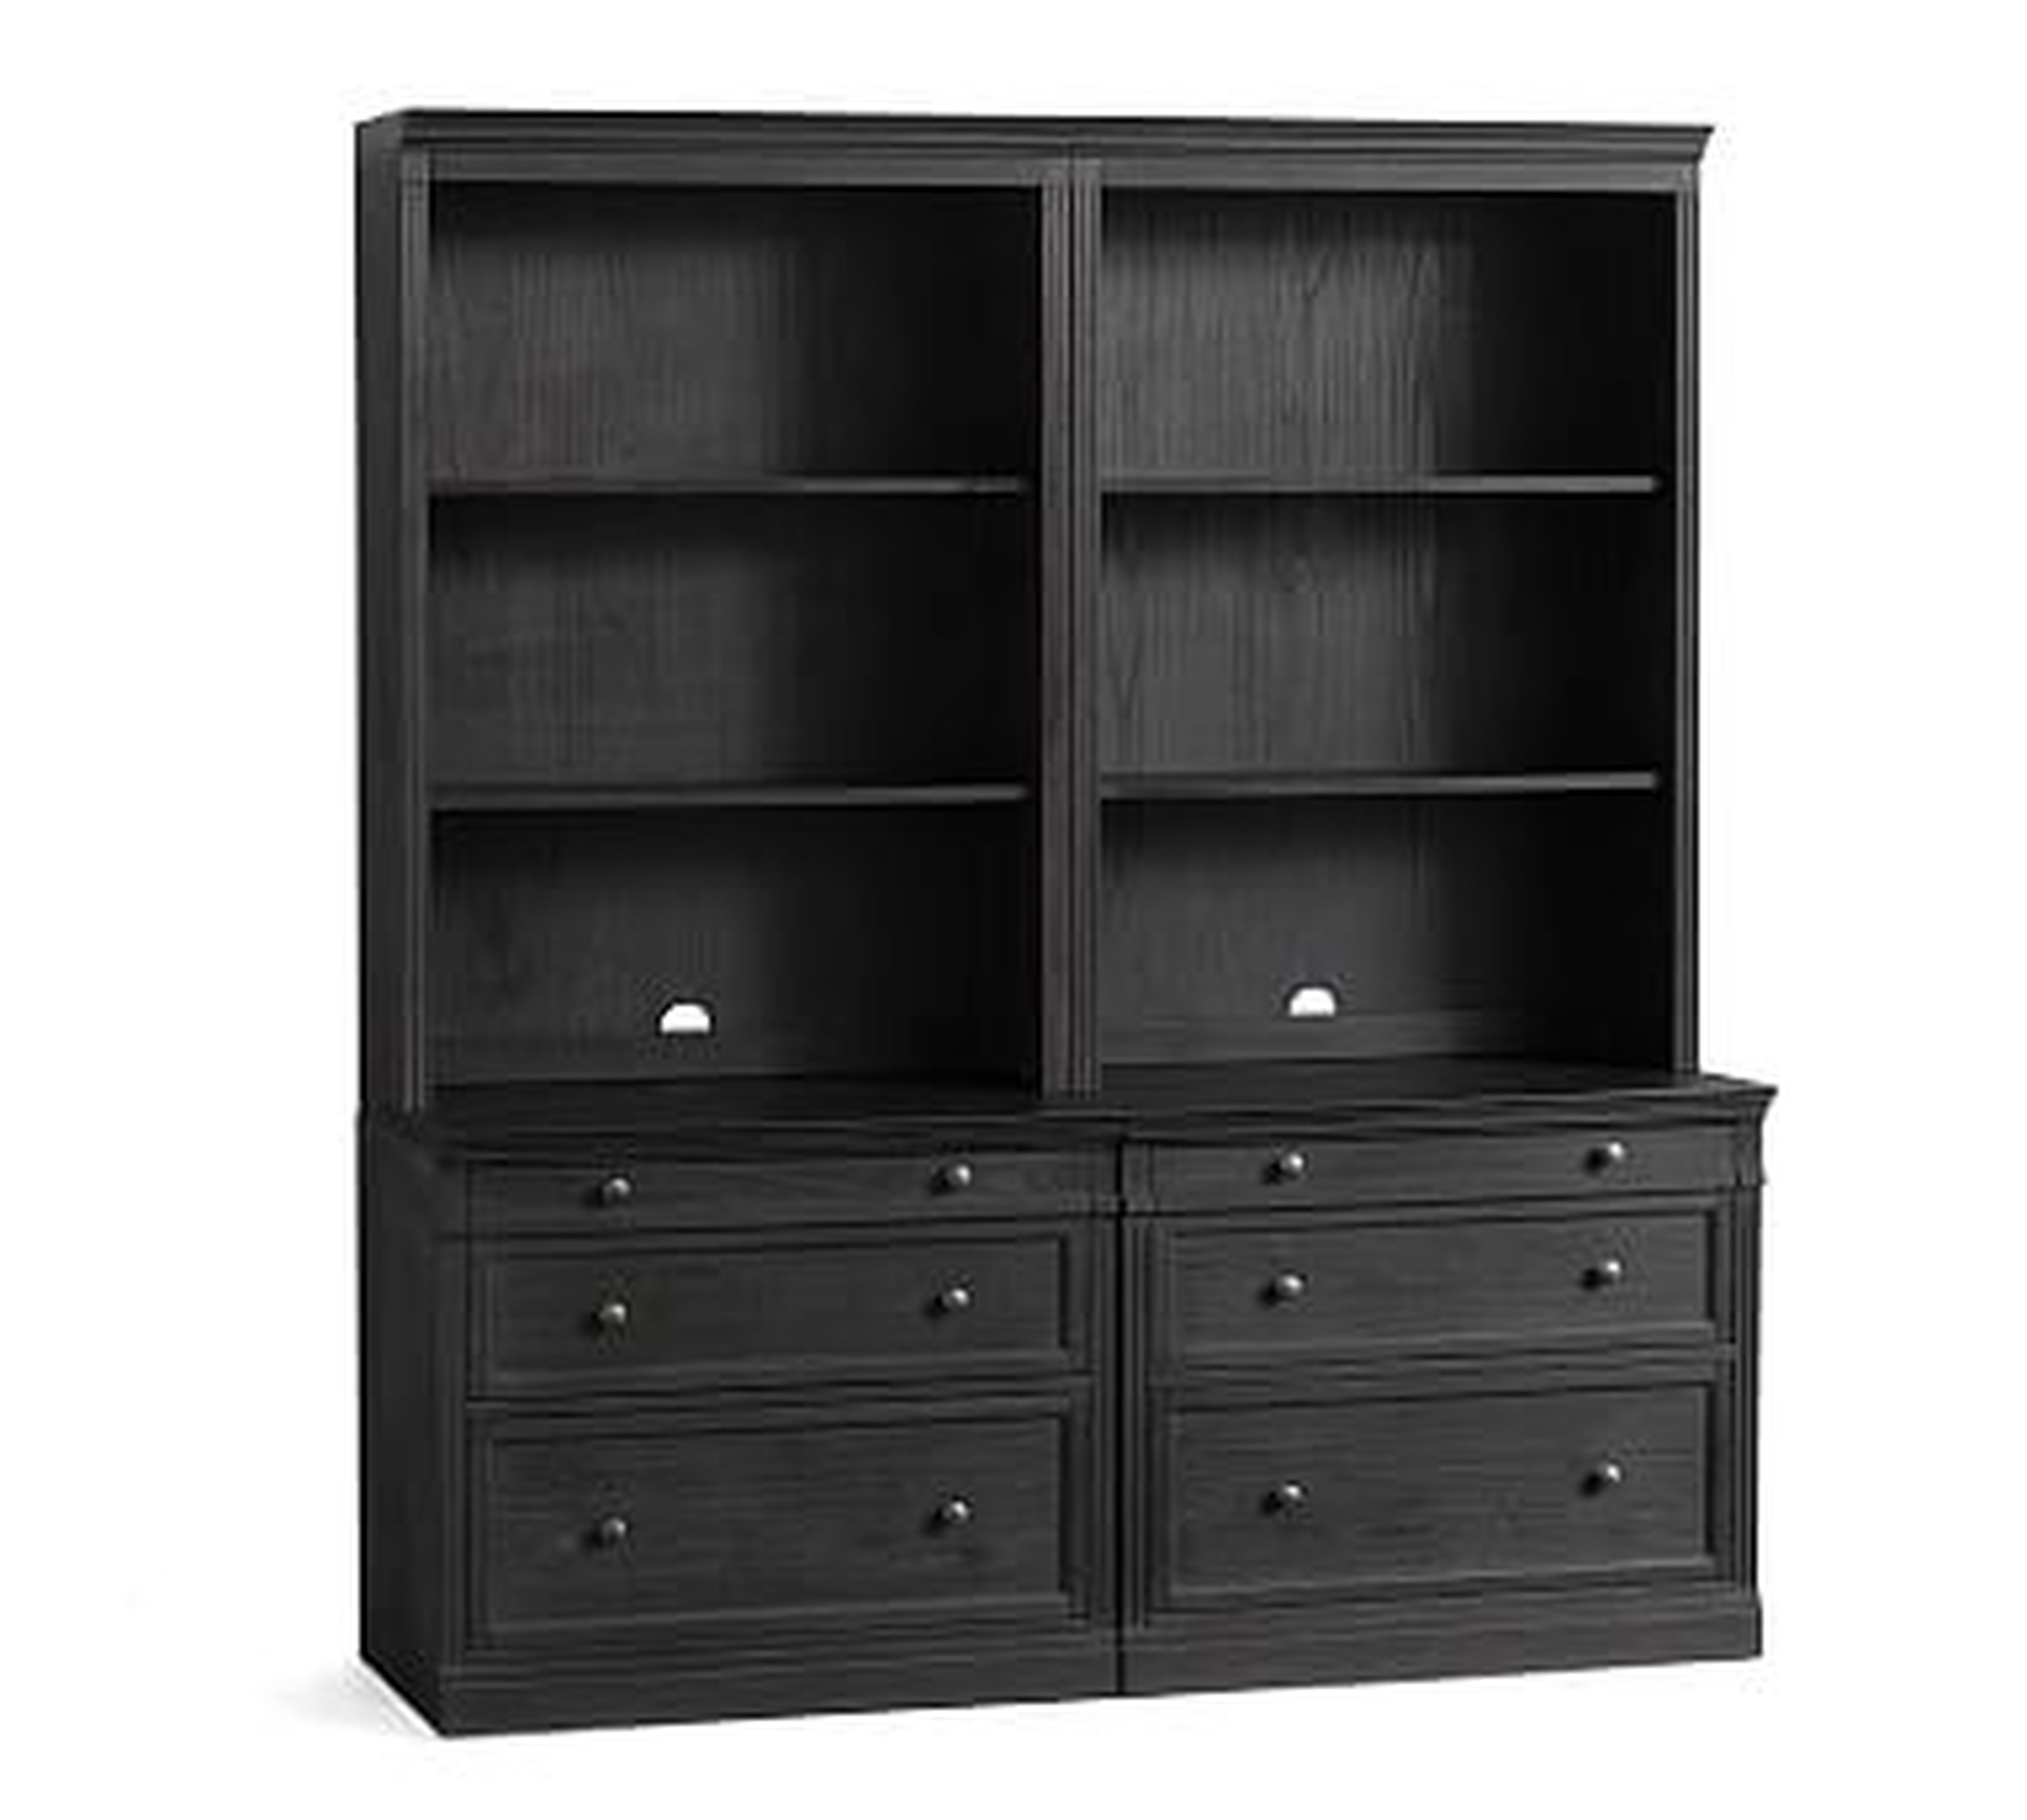 Livingston Bookcase with File Cabinets, Dusty Charcoal, 70"L x 81"H - Pottery Barn